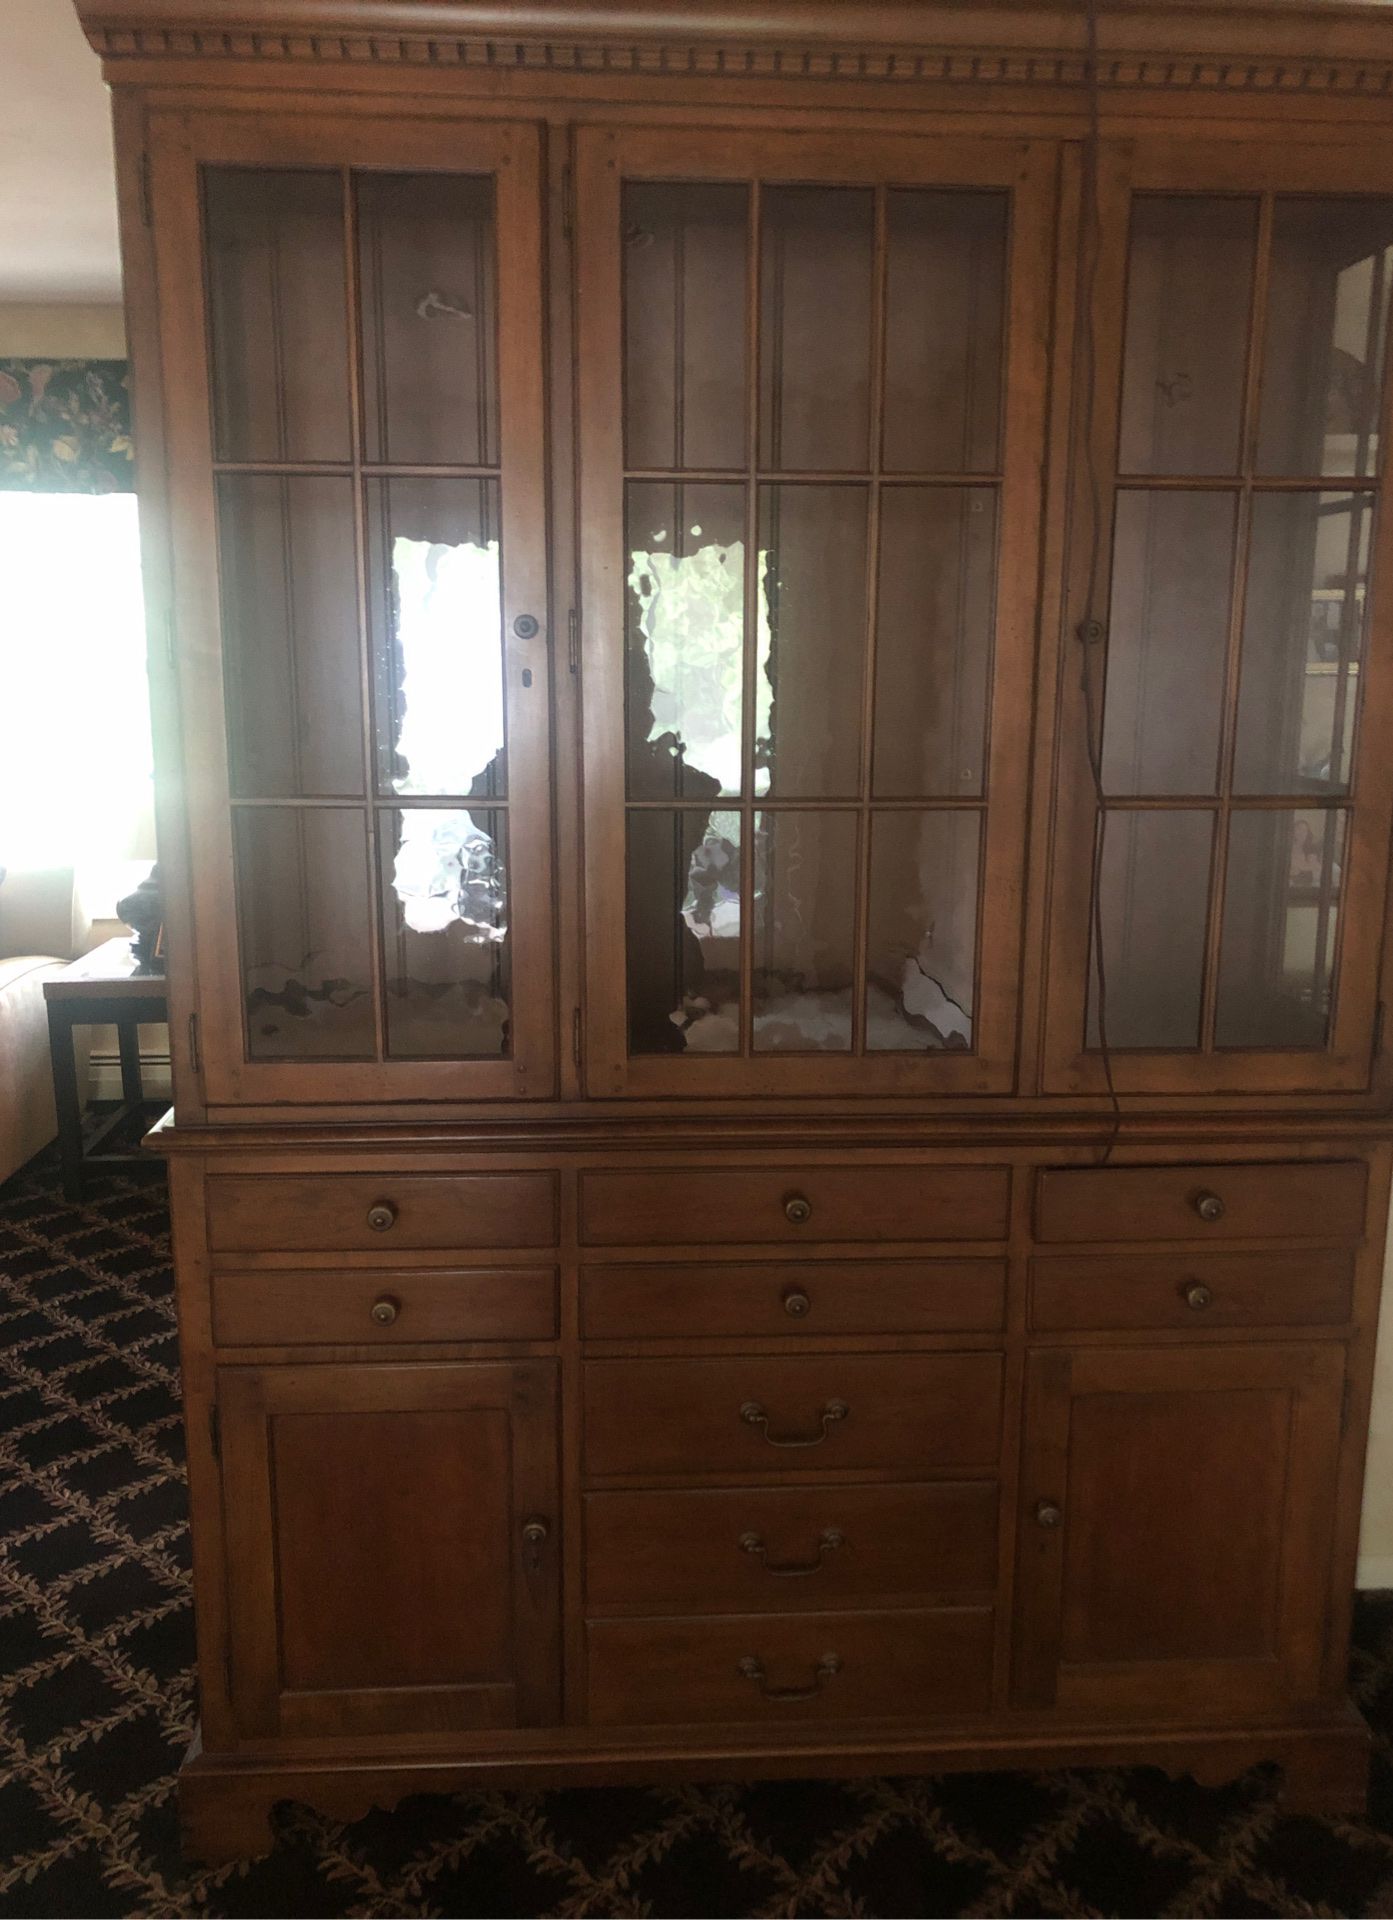 Breakfront, Drexel, glass shelve, included lights on all shelves. Includes 9 drawers and 2 cupboards. Dark maple finish. Great condition. Also have